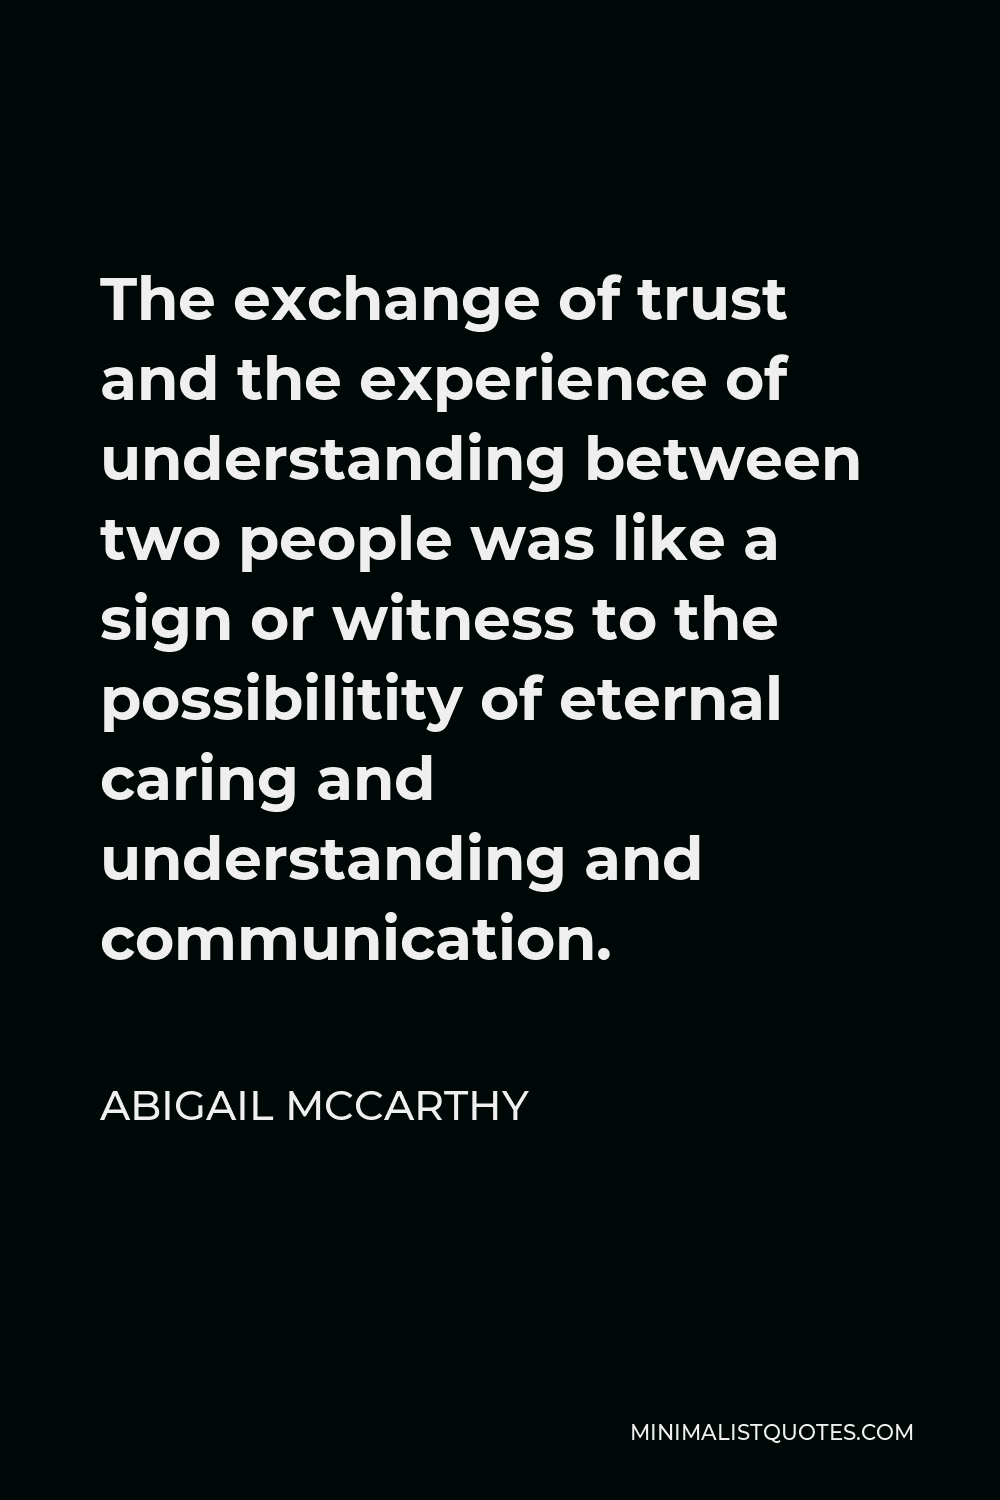 Abigail McCarthy Quote - The exchange of trust and the experience of understanding between two people was like a sign or witness to the possibilitity of eternal caring and understanding and communication.